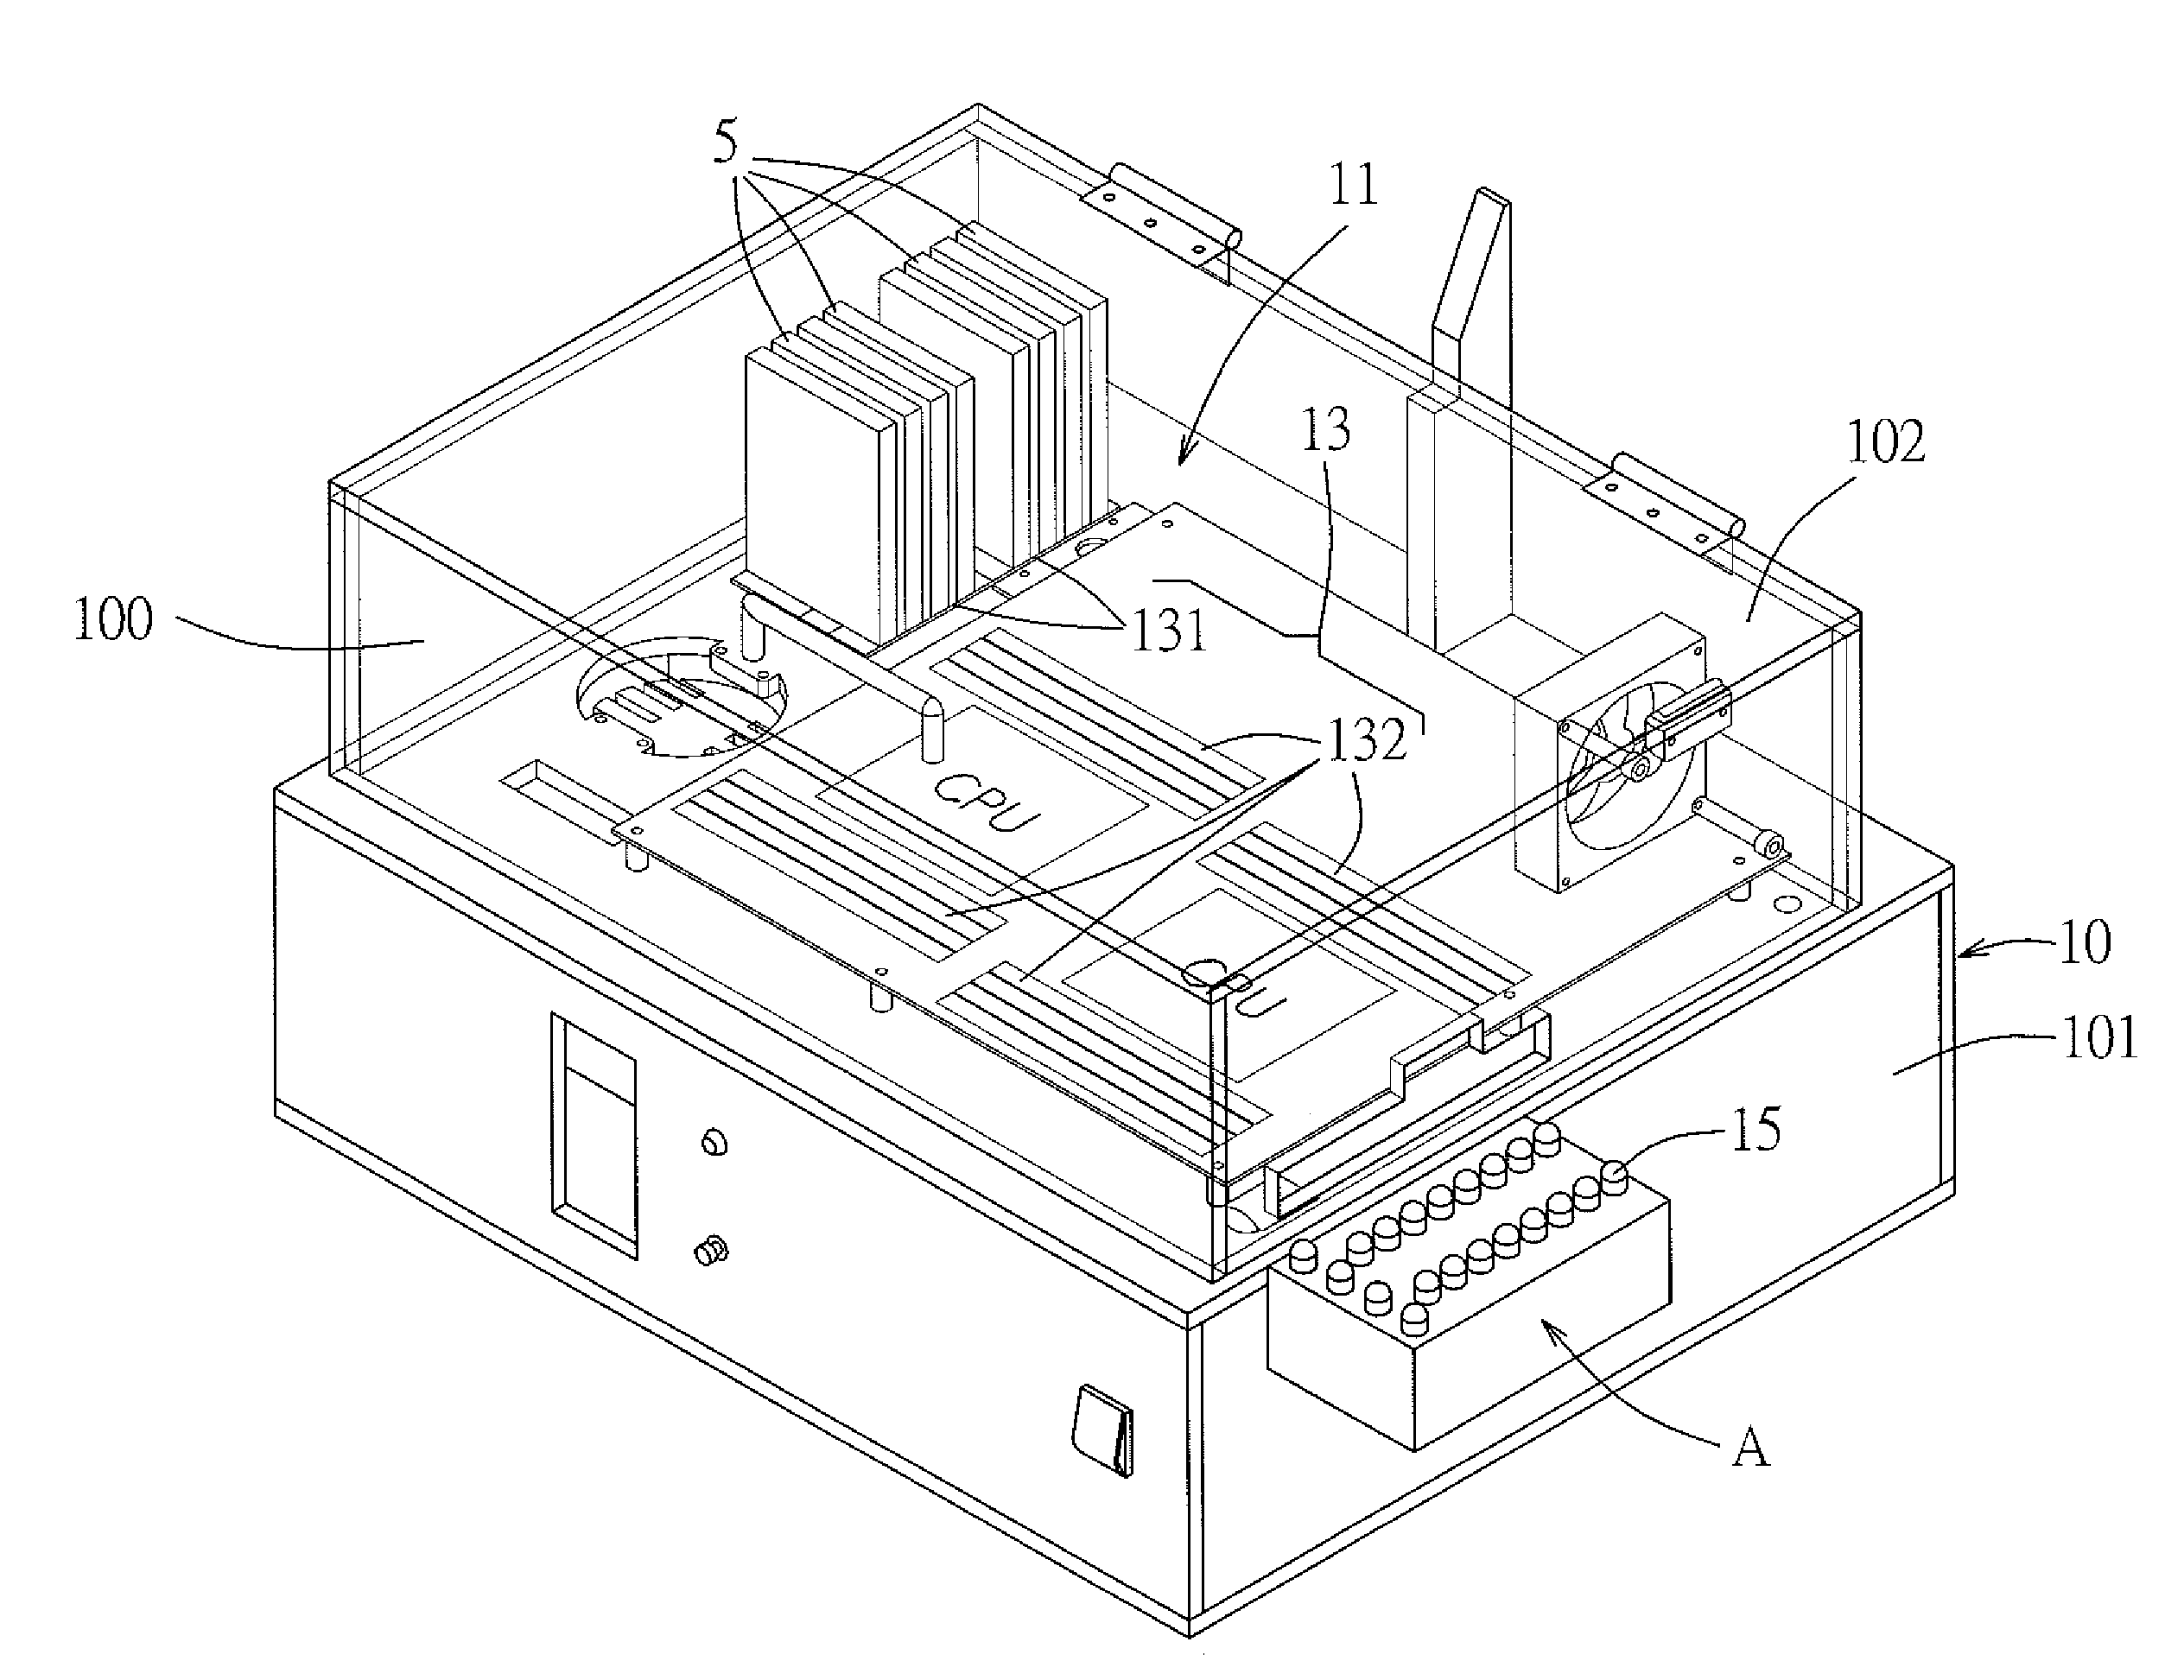 System and method for cloud testing and remote monitoring of integrated circuit devices